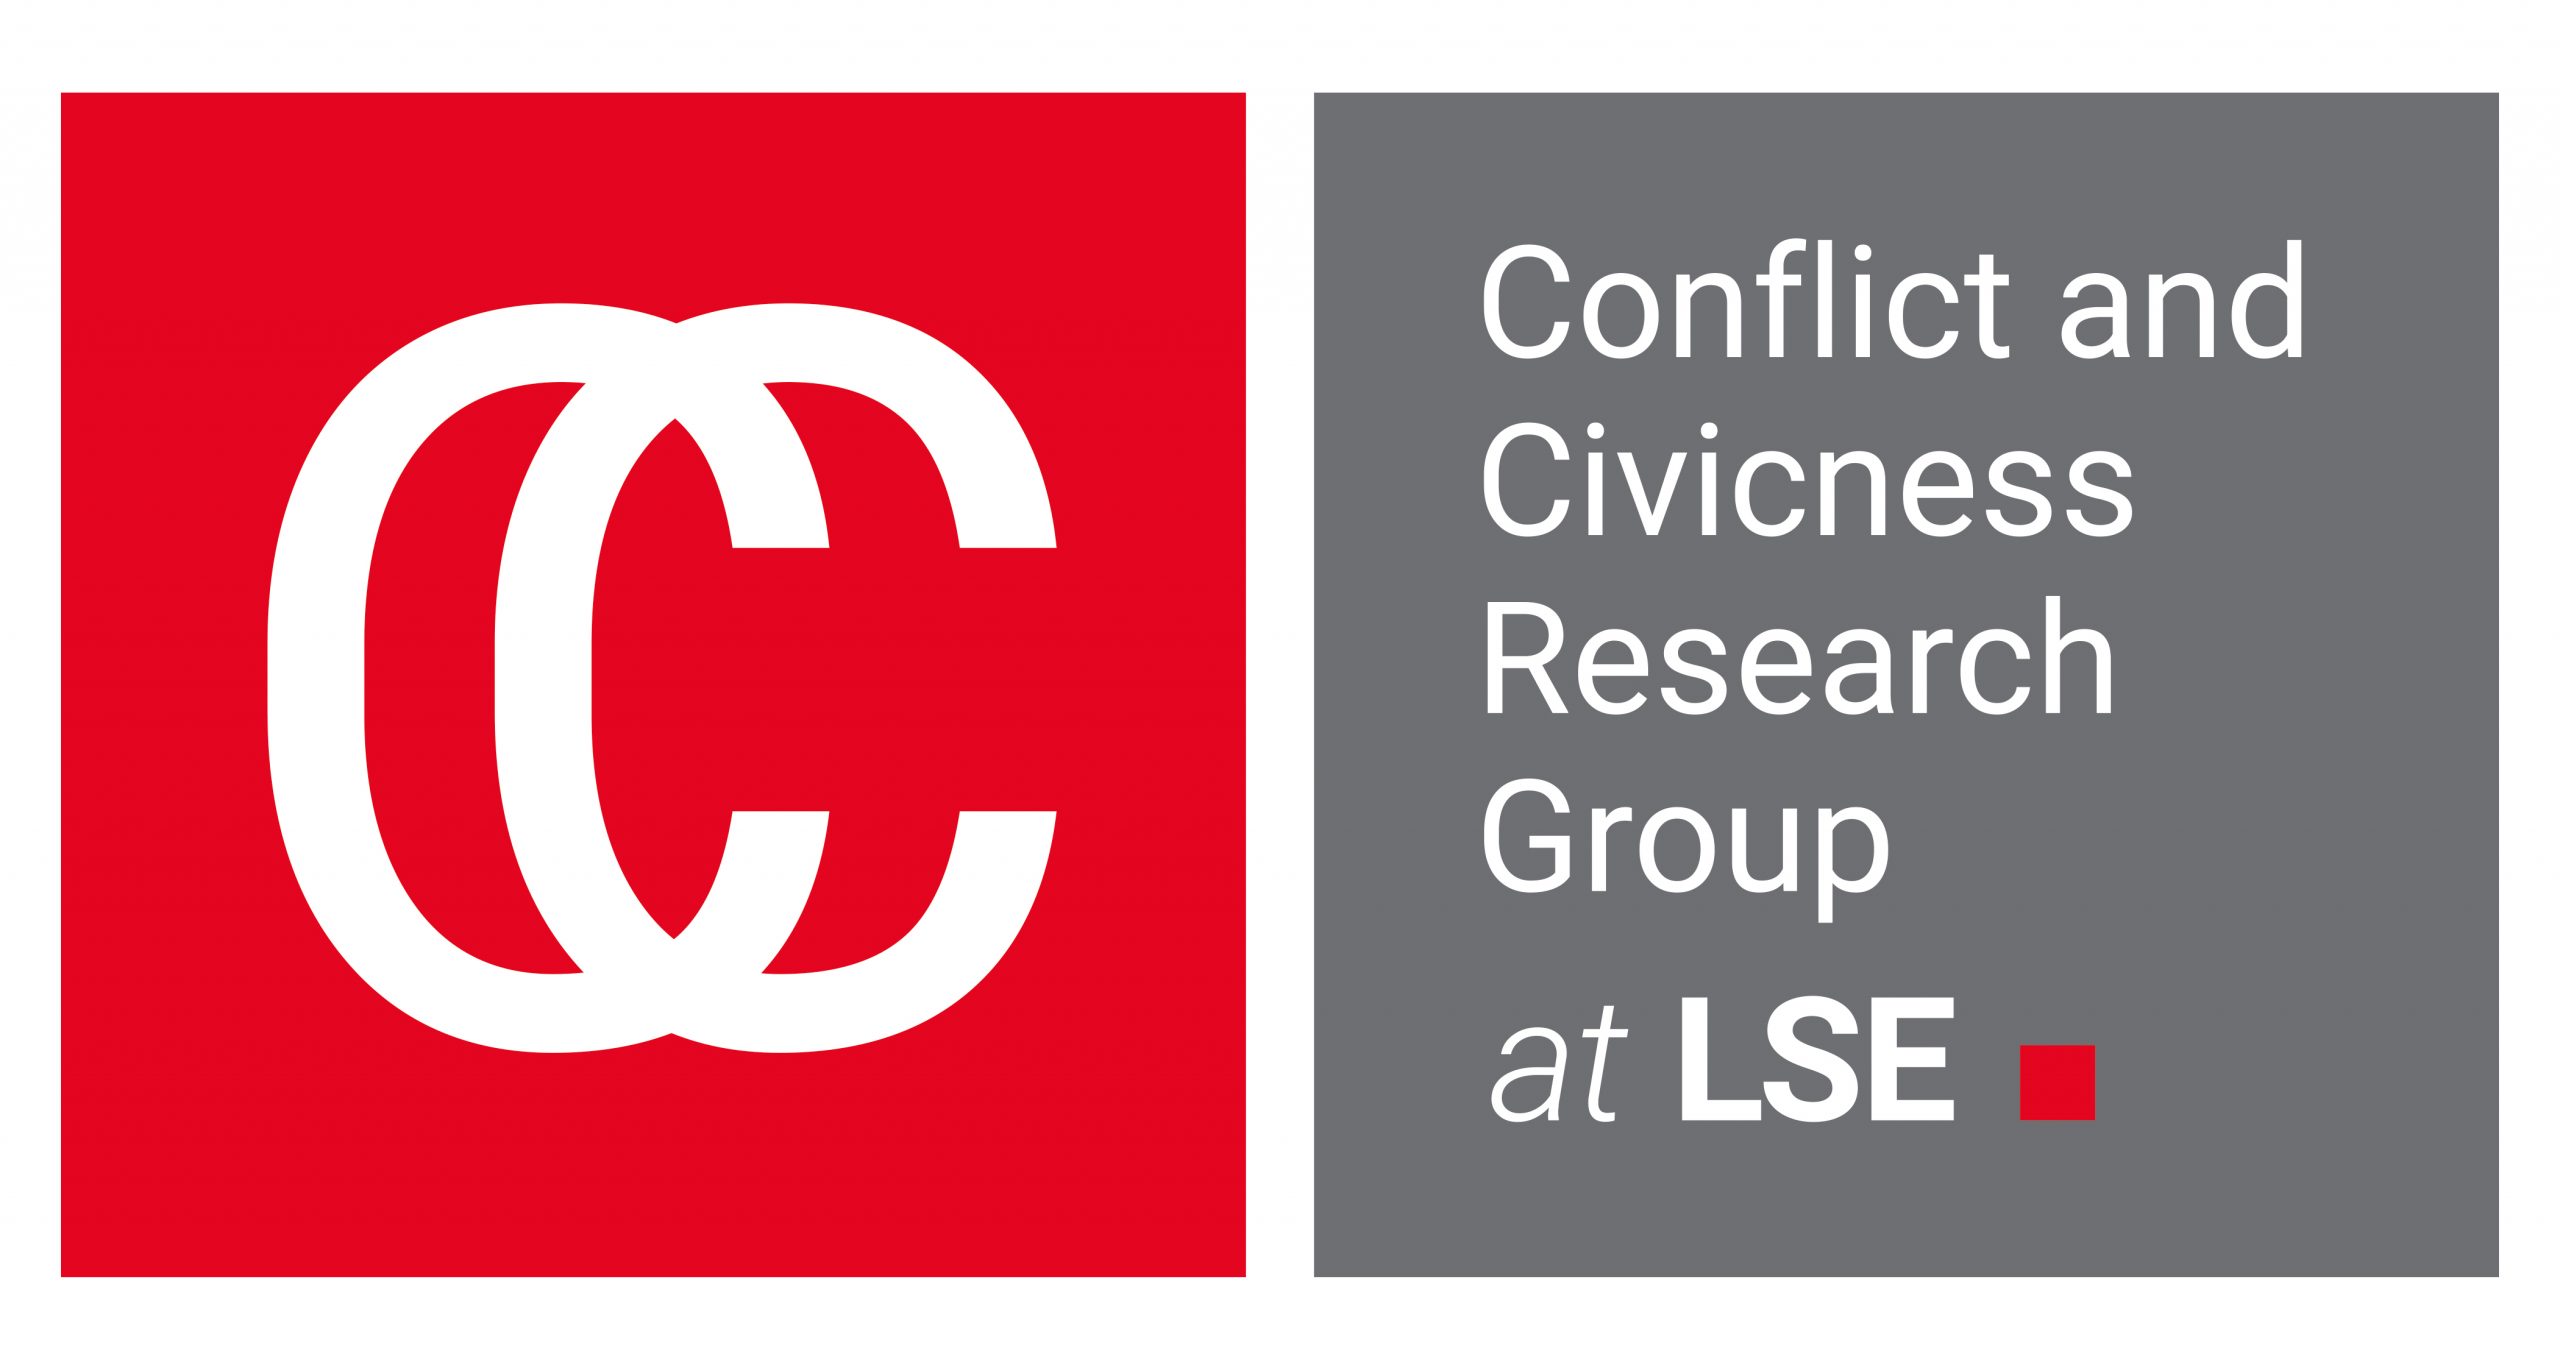 Conflict and Civicness Research Group at LSE logo